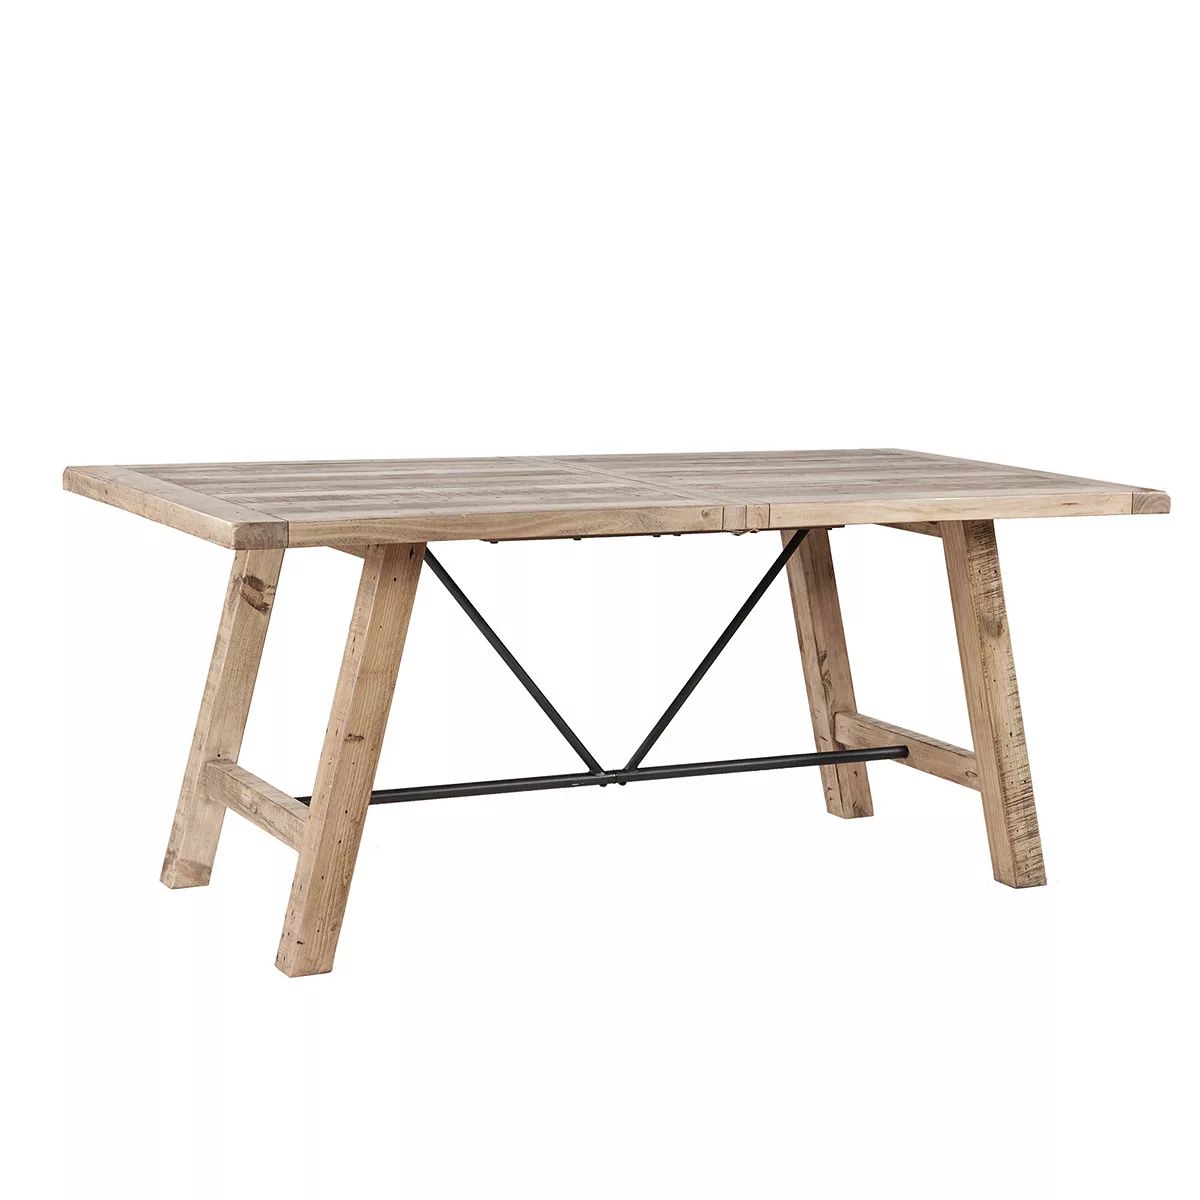 INK+IVY Sonoma Dining Table | Kohl's